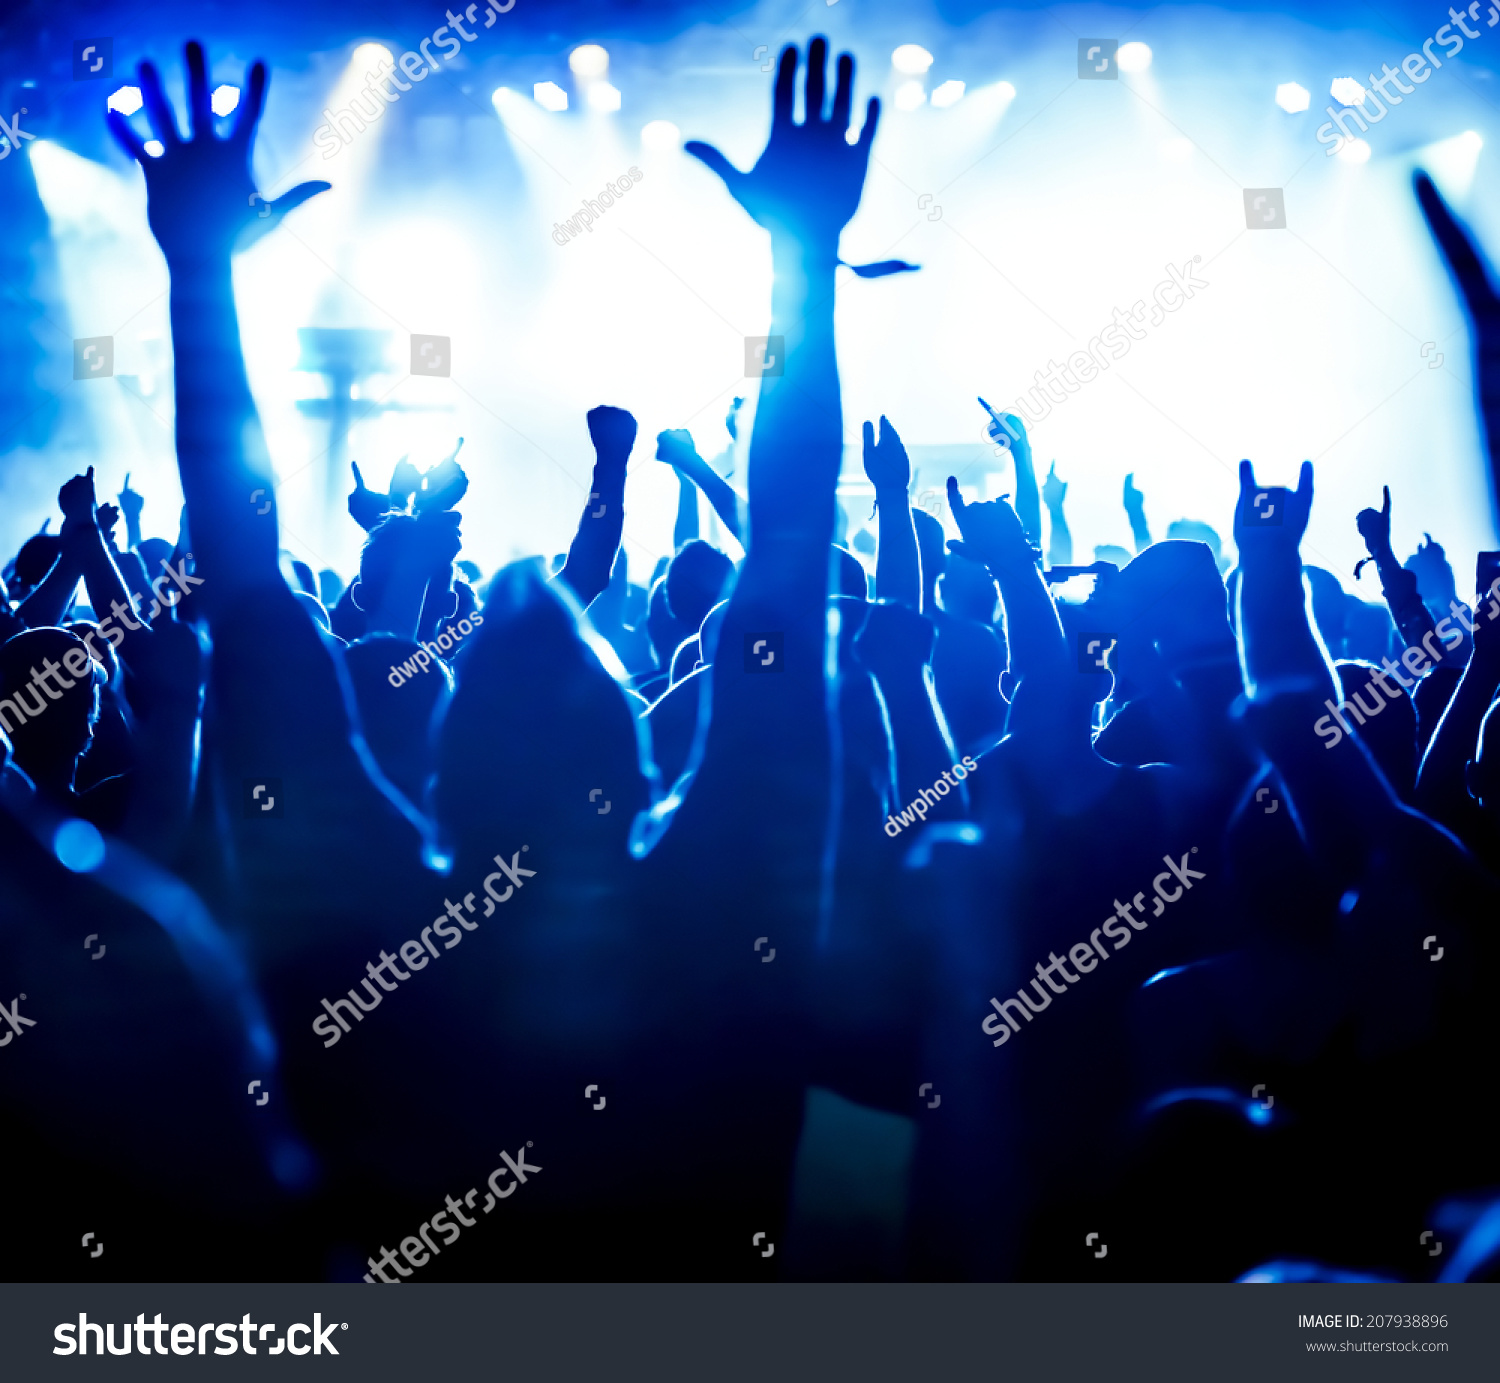 silhouettes of concert crowd in front of bright stage lights #207938896